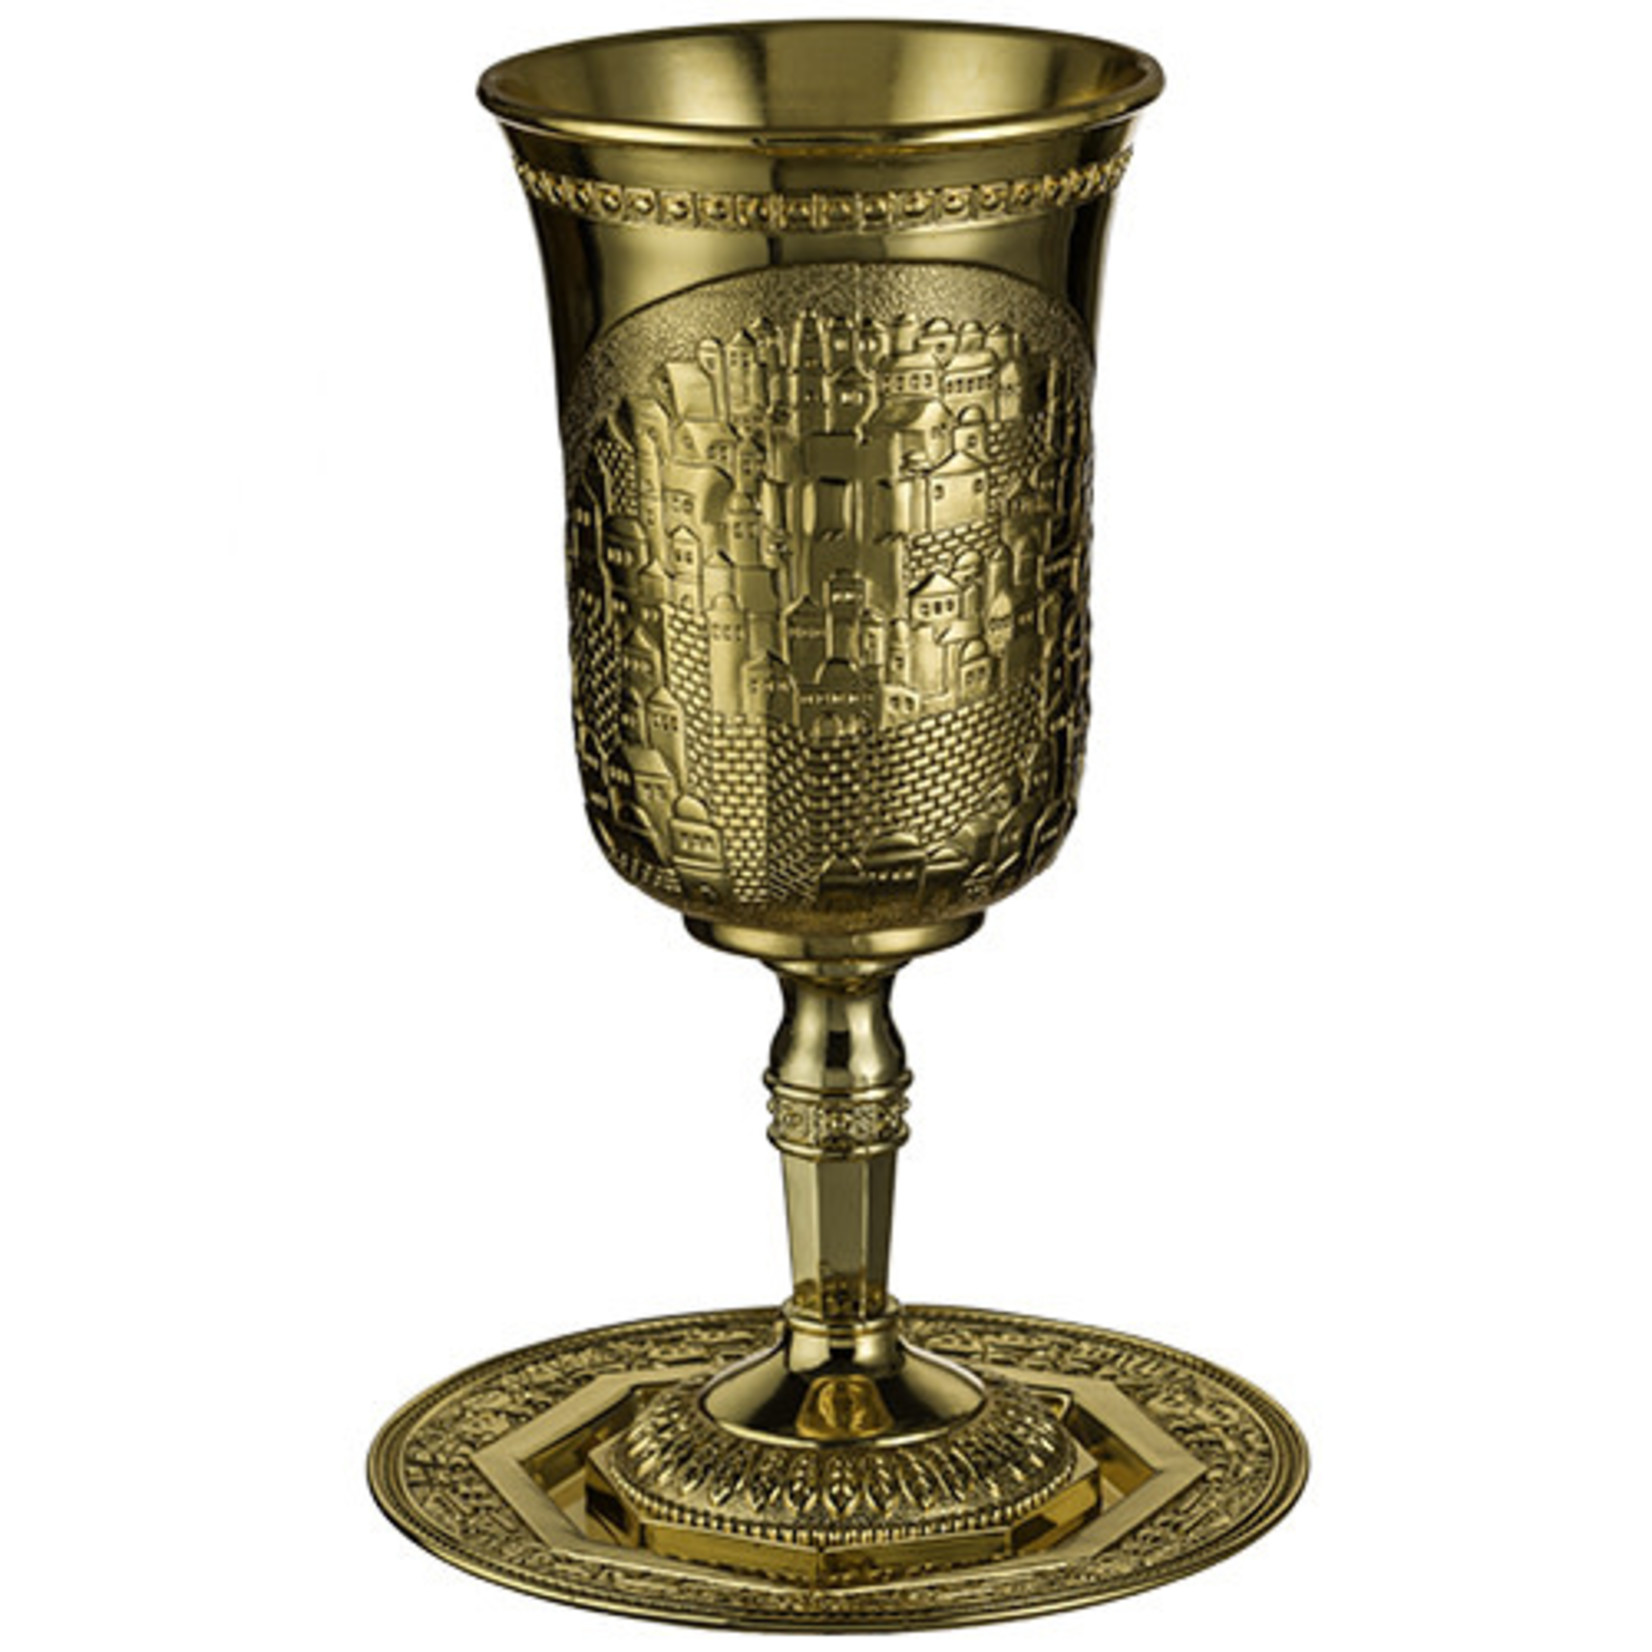 Elijah Cup with Tray, Brass-Plated Nickel